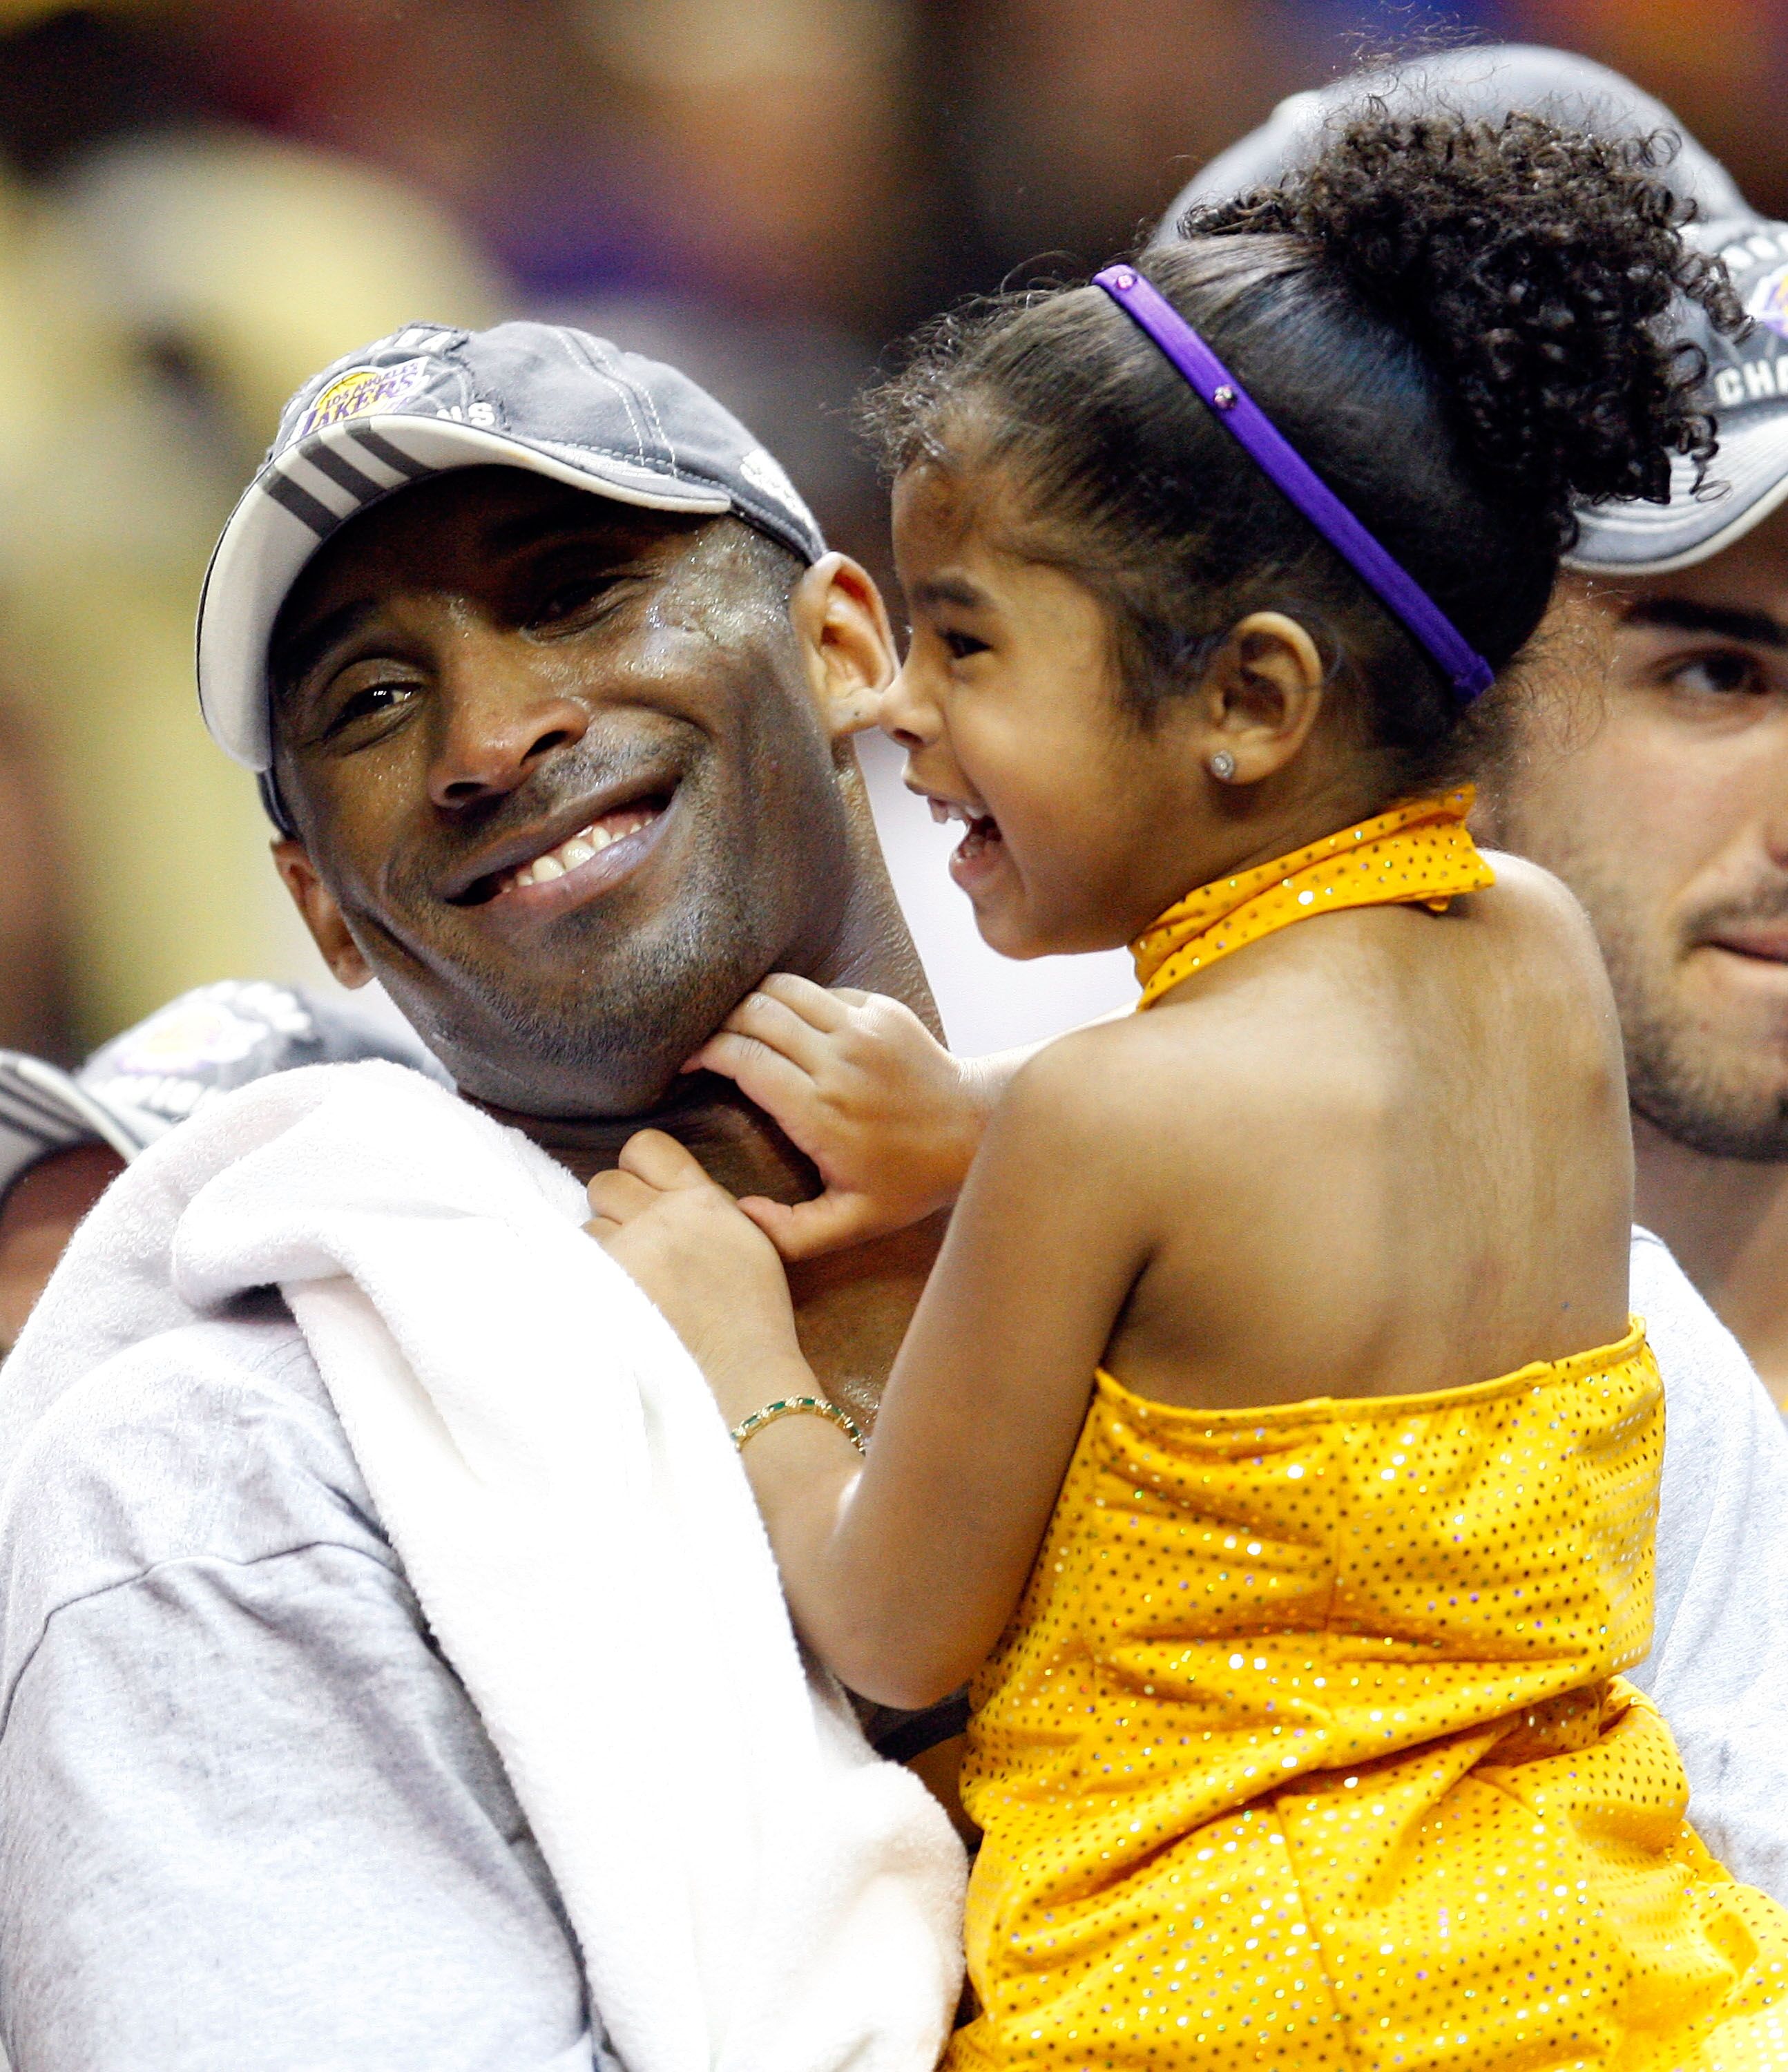 Kobe Bryant and his daughter GiGi at one of the LA Lakers' games | Source: Getty Images/GlobalImagesUkraine